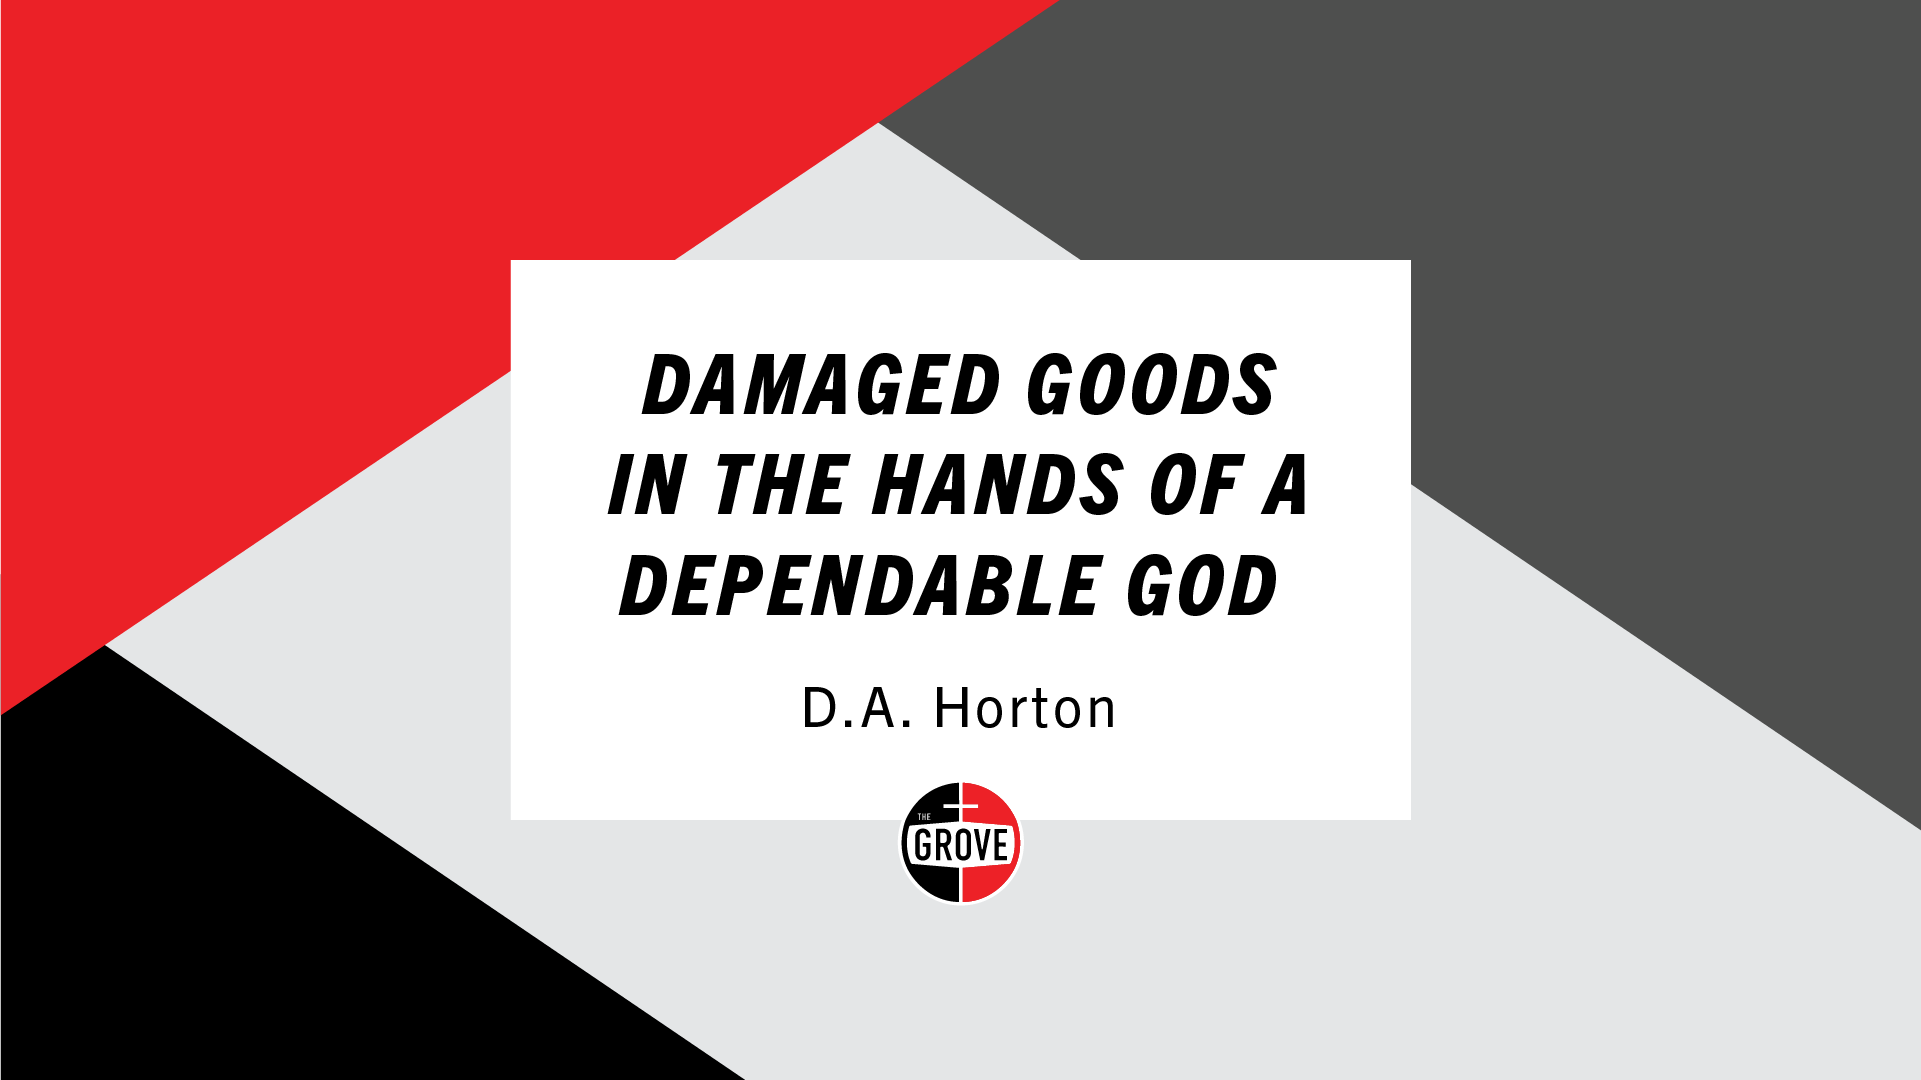 Damaged Goods in the Hands of a Dependable God